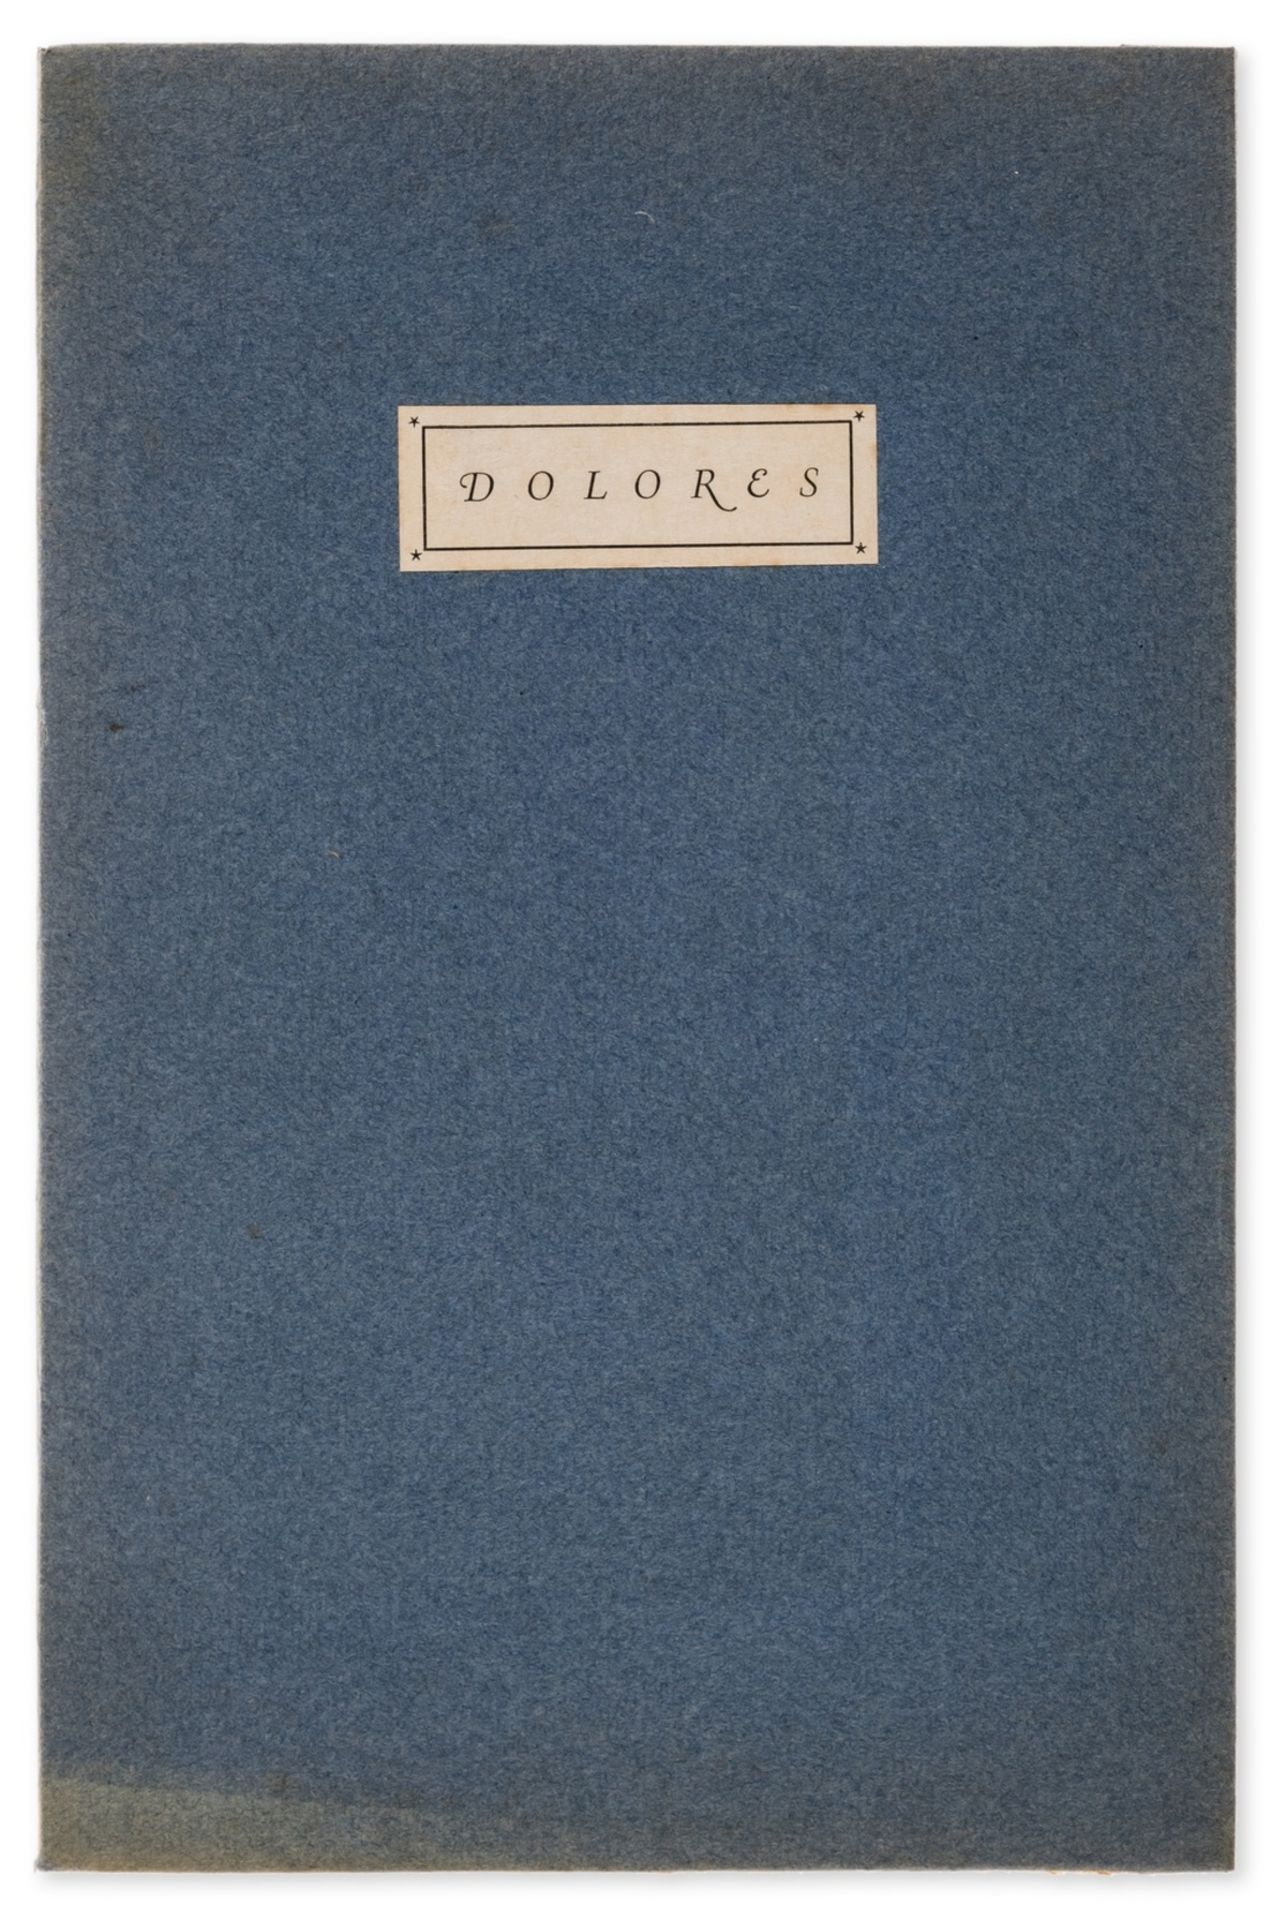 Buckland Wright (John).- Swinburne (Algernon Charles) Dolores, first edition [one of 50 copies on …